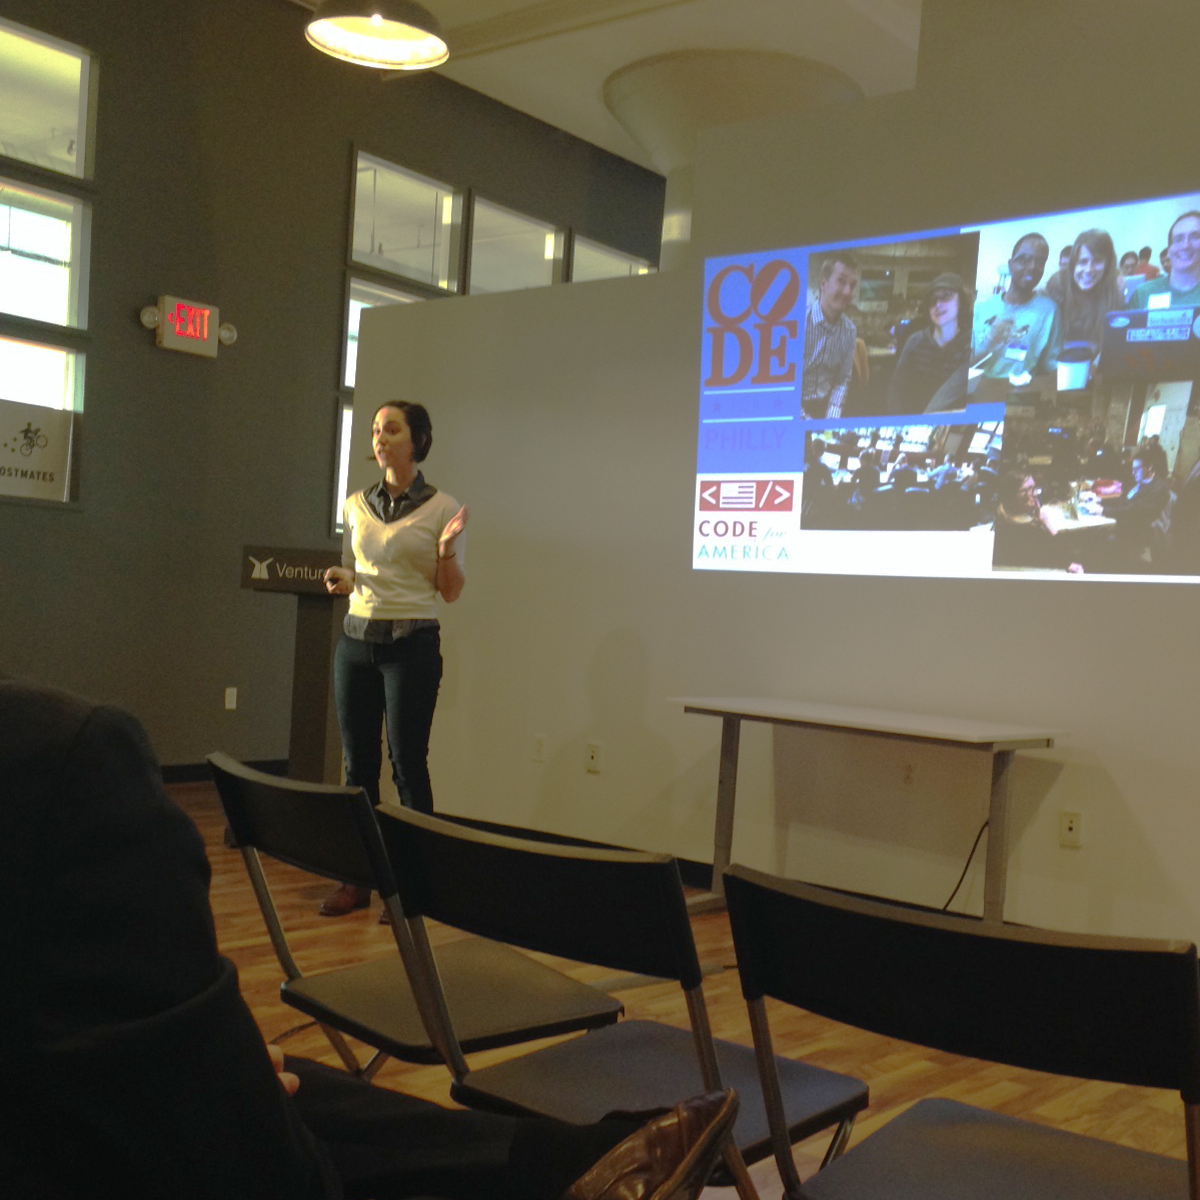 February Convening of OpenAccessPHL Featured How Organizations Are Making Themselves Innovative